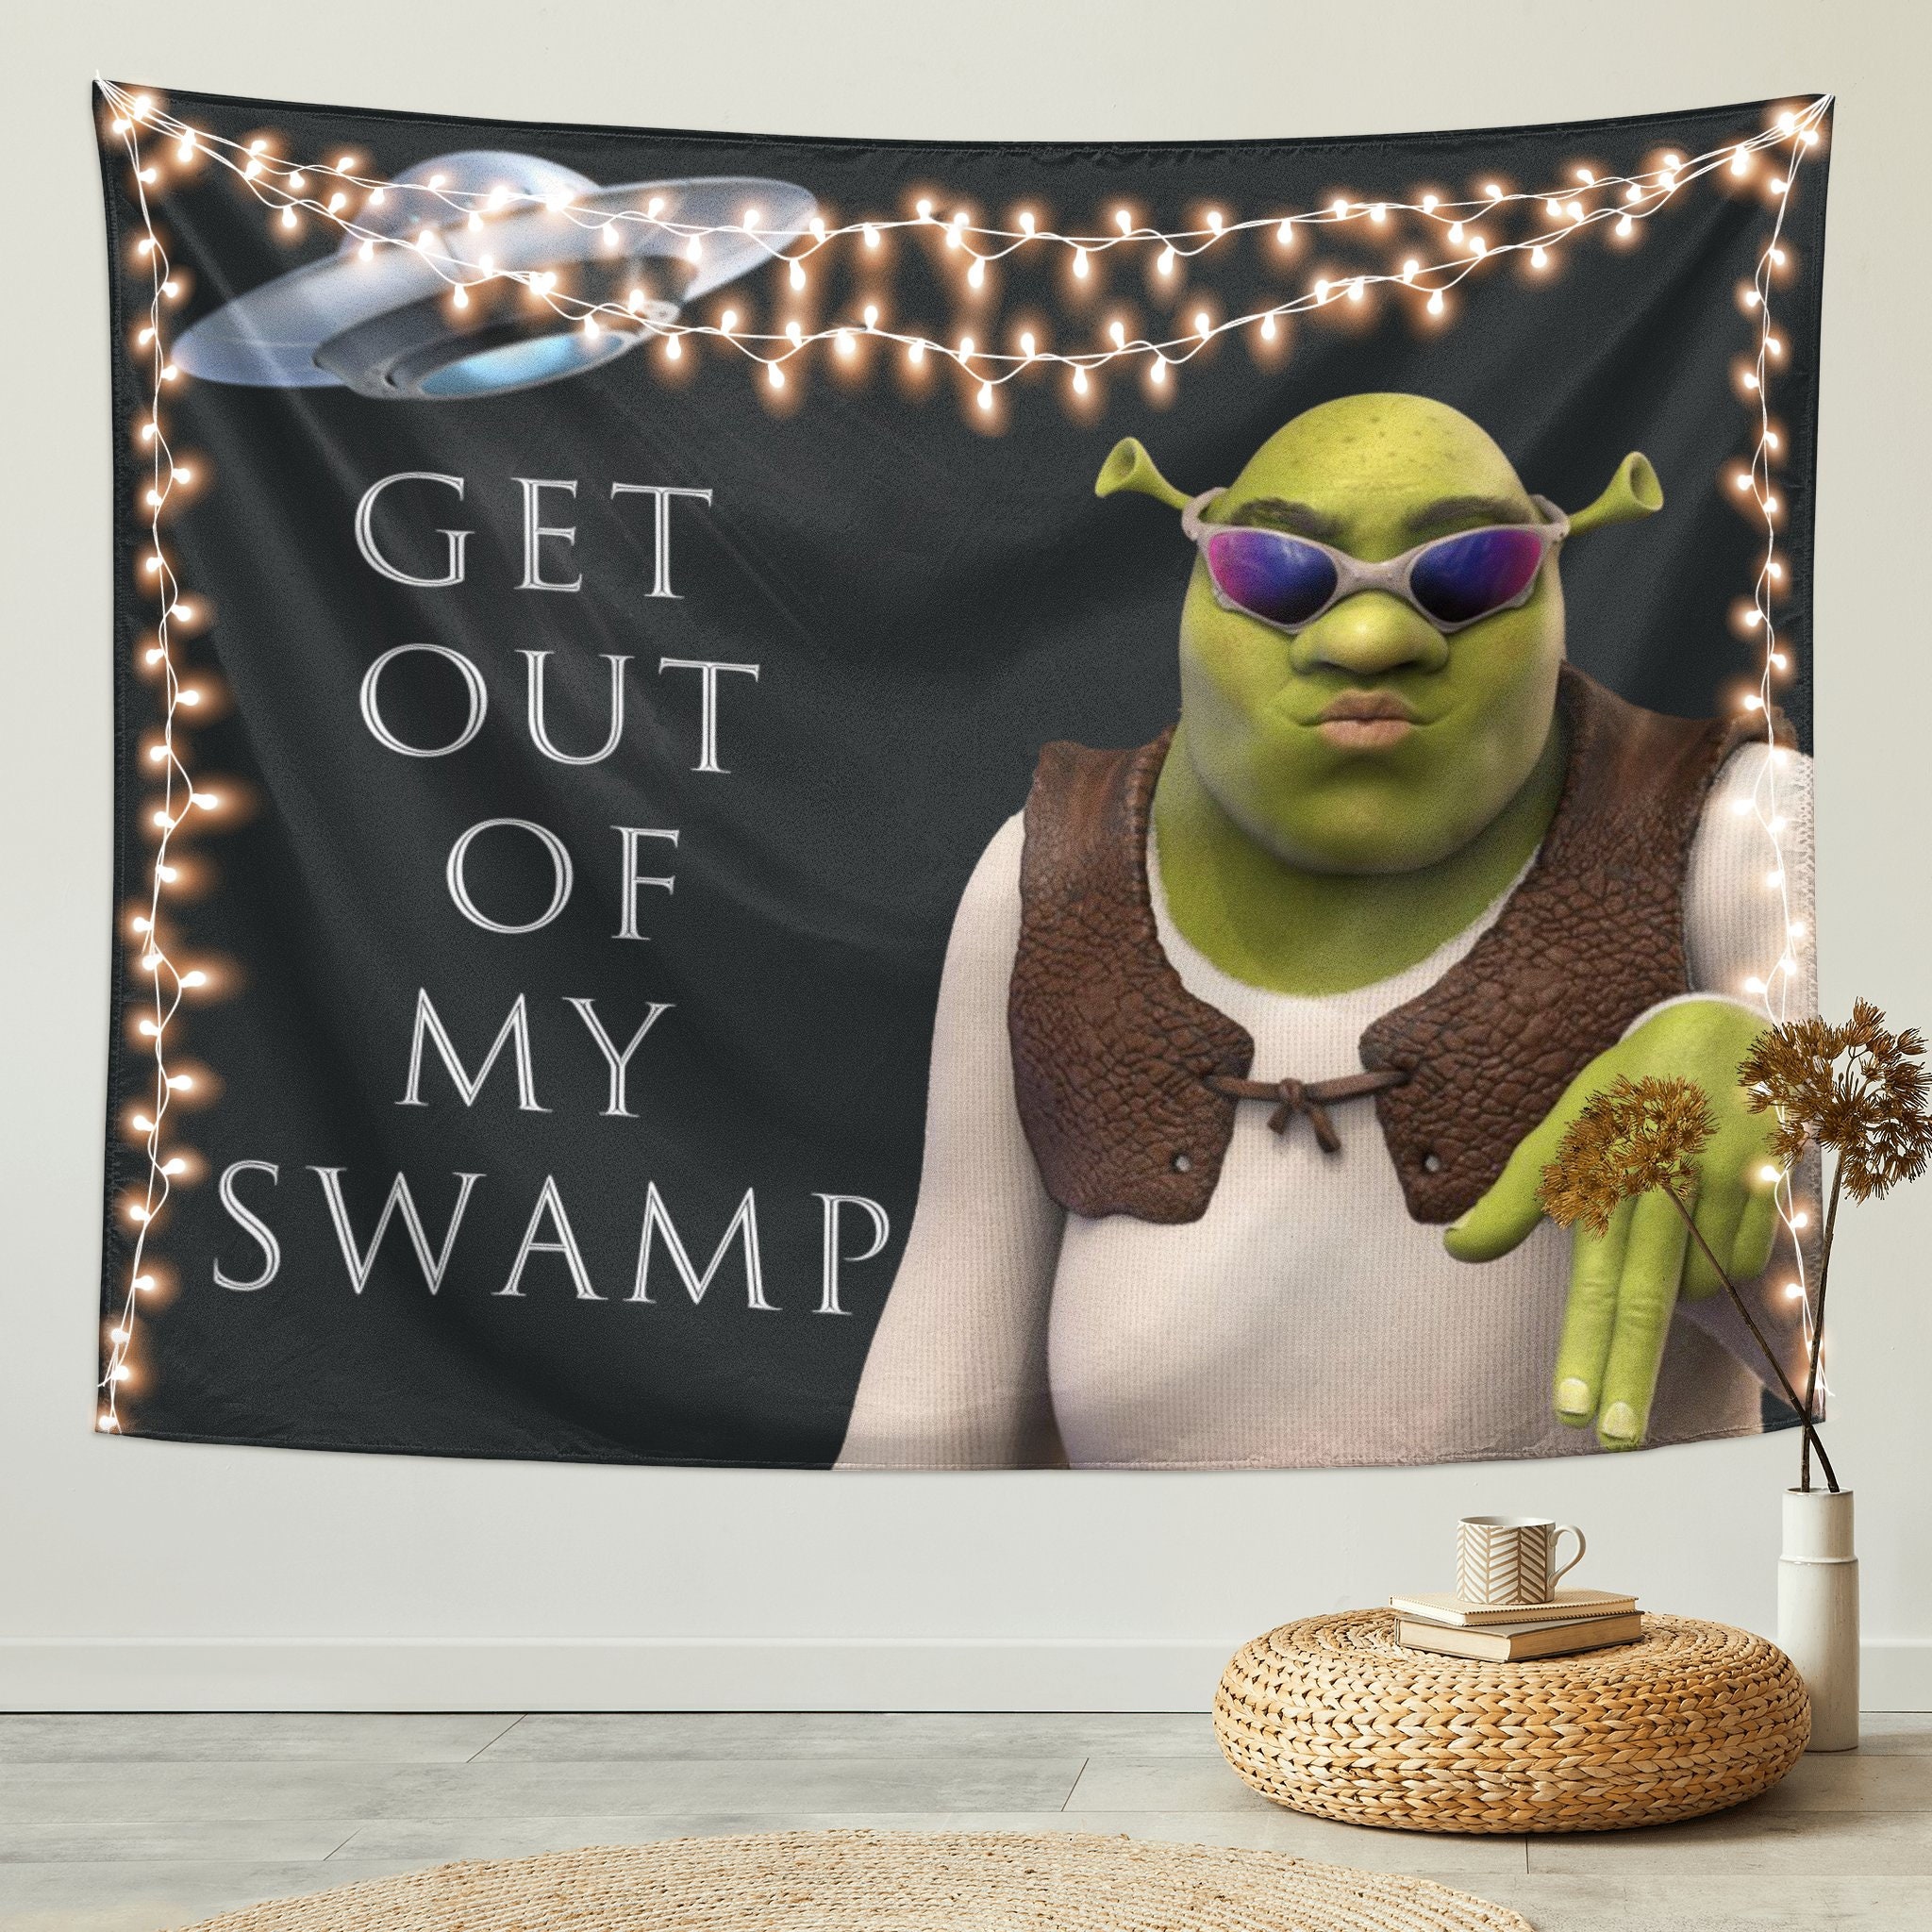 Get Out of My Swamp Meme Funny Tapestry Shrek Tapestries Wall Hanging for  Bedroom College Dorm Home Decor 